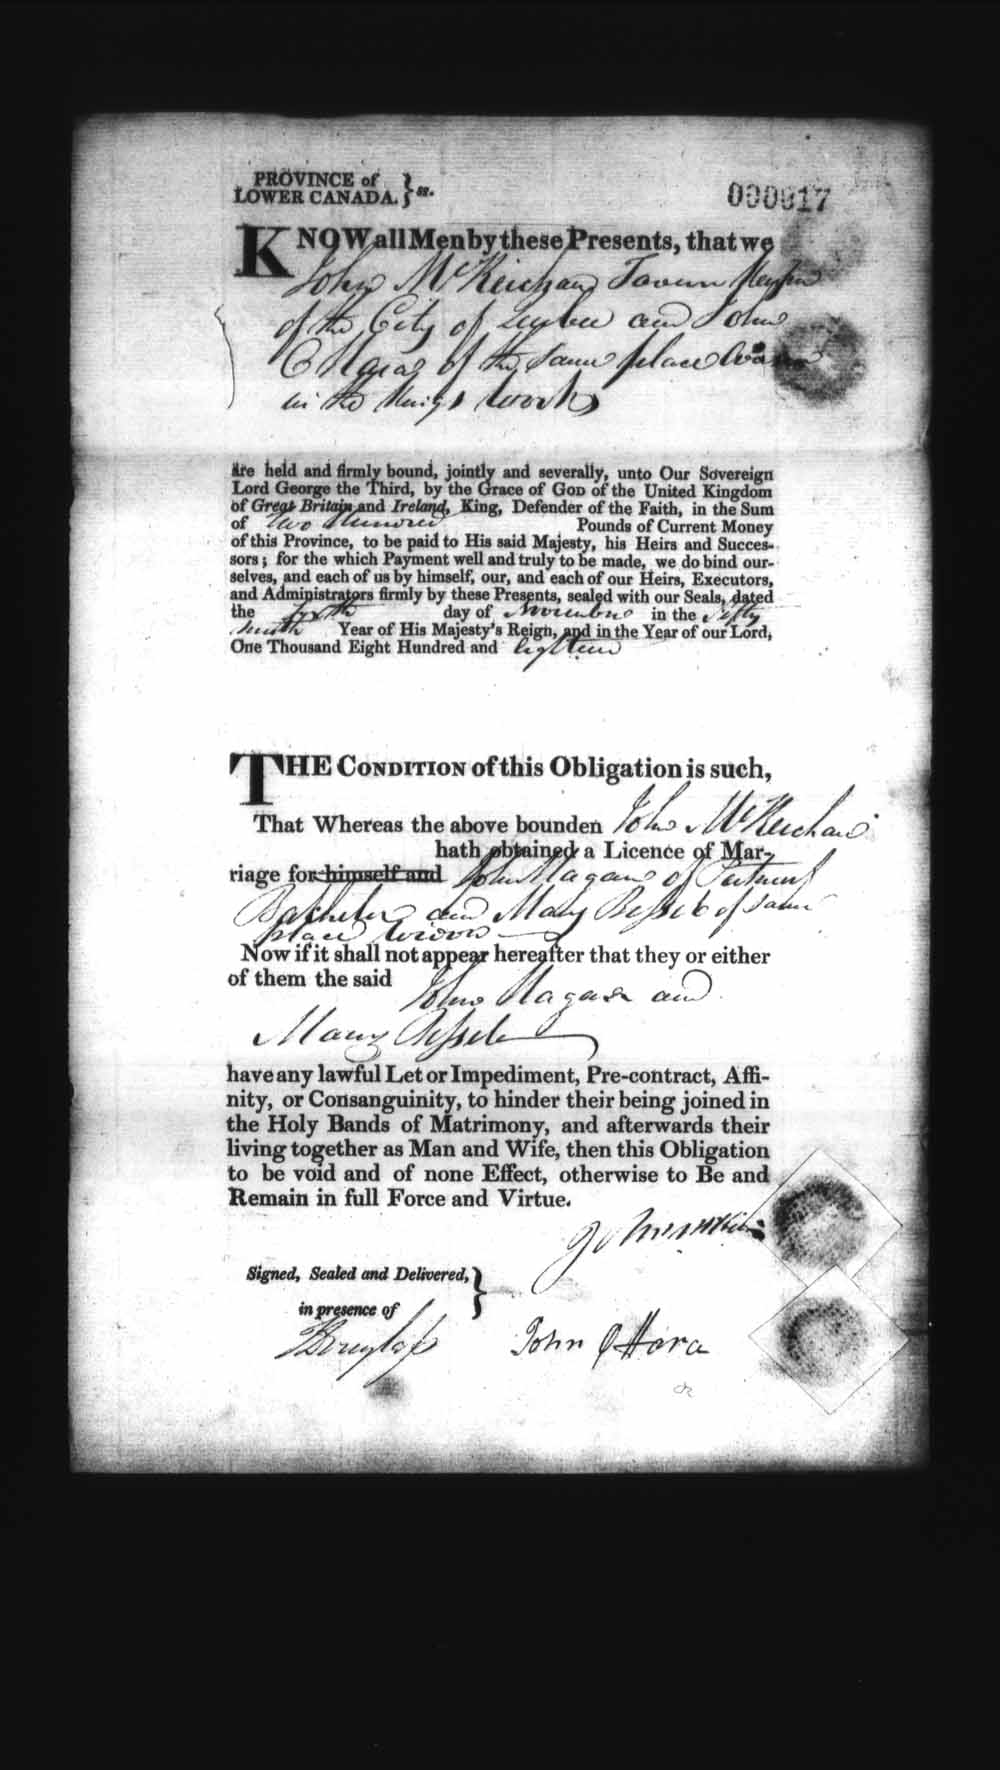 Digitized page of Upper and Lower Canada Marriage Bonds (1779-1865) for Image No.: e008235826